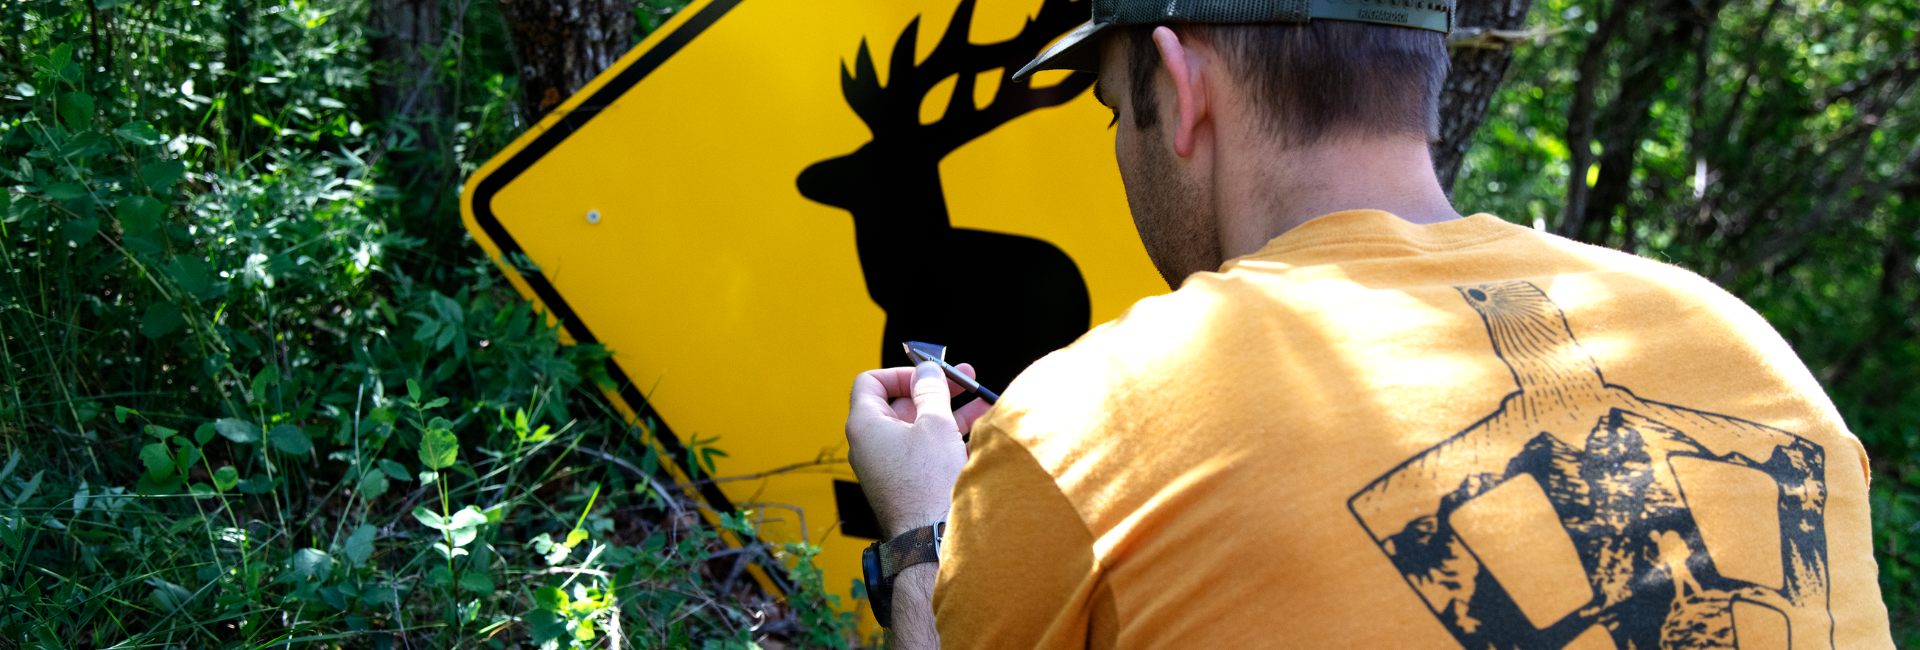 person in a yellow shirt screwing on a broadhead in front of a road sign with an elk silhouette, out in the forest.